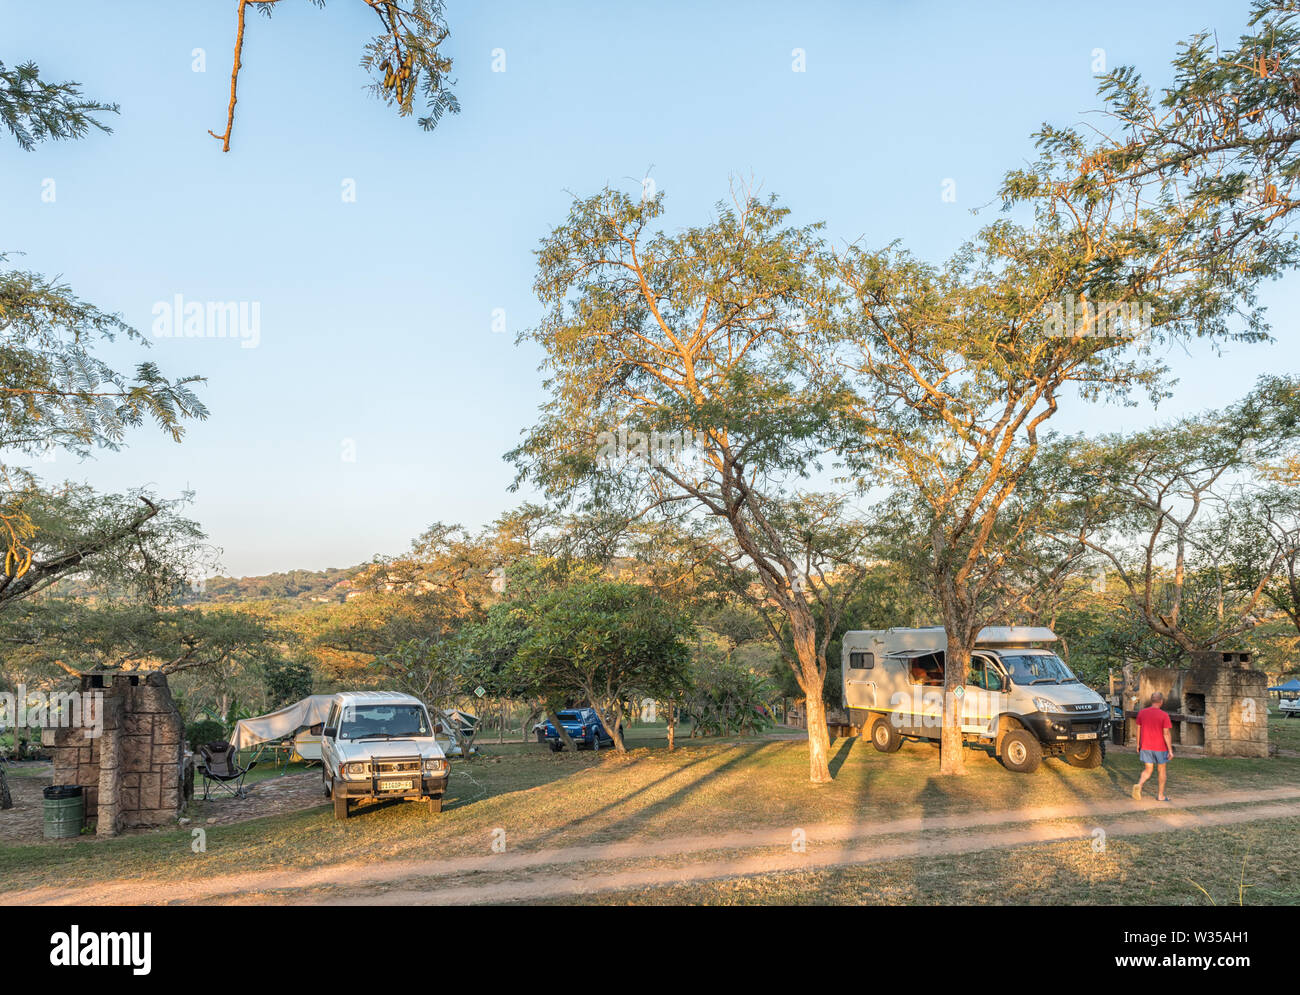 NELSPRUIT, SOUTH AFRICA - MAY 2, 2019: A motorhome, caravan and vehicles at the Lakeview Lodge and Caravan Park at Nelspruit in the Mpumalanga Provinc Stock Photo